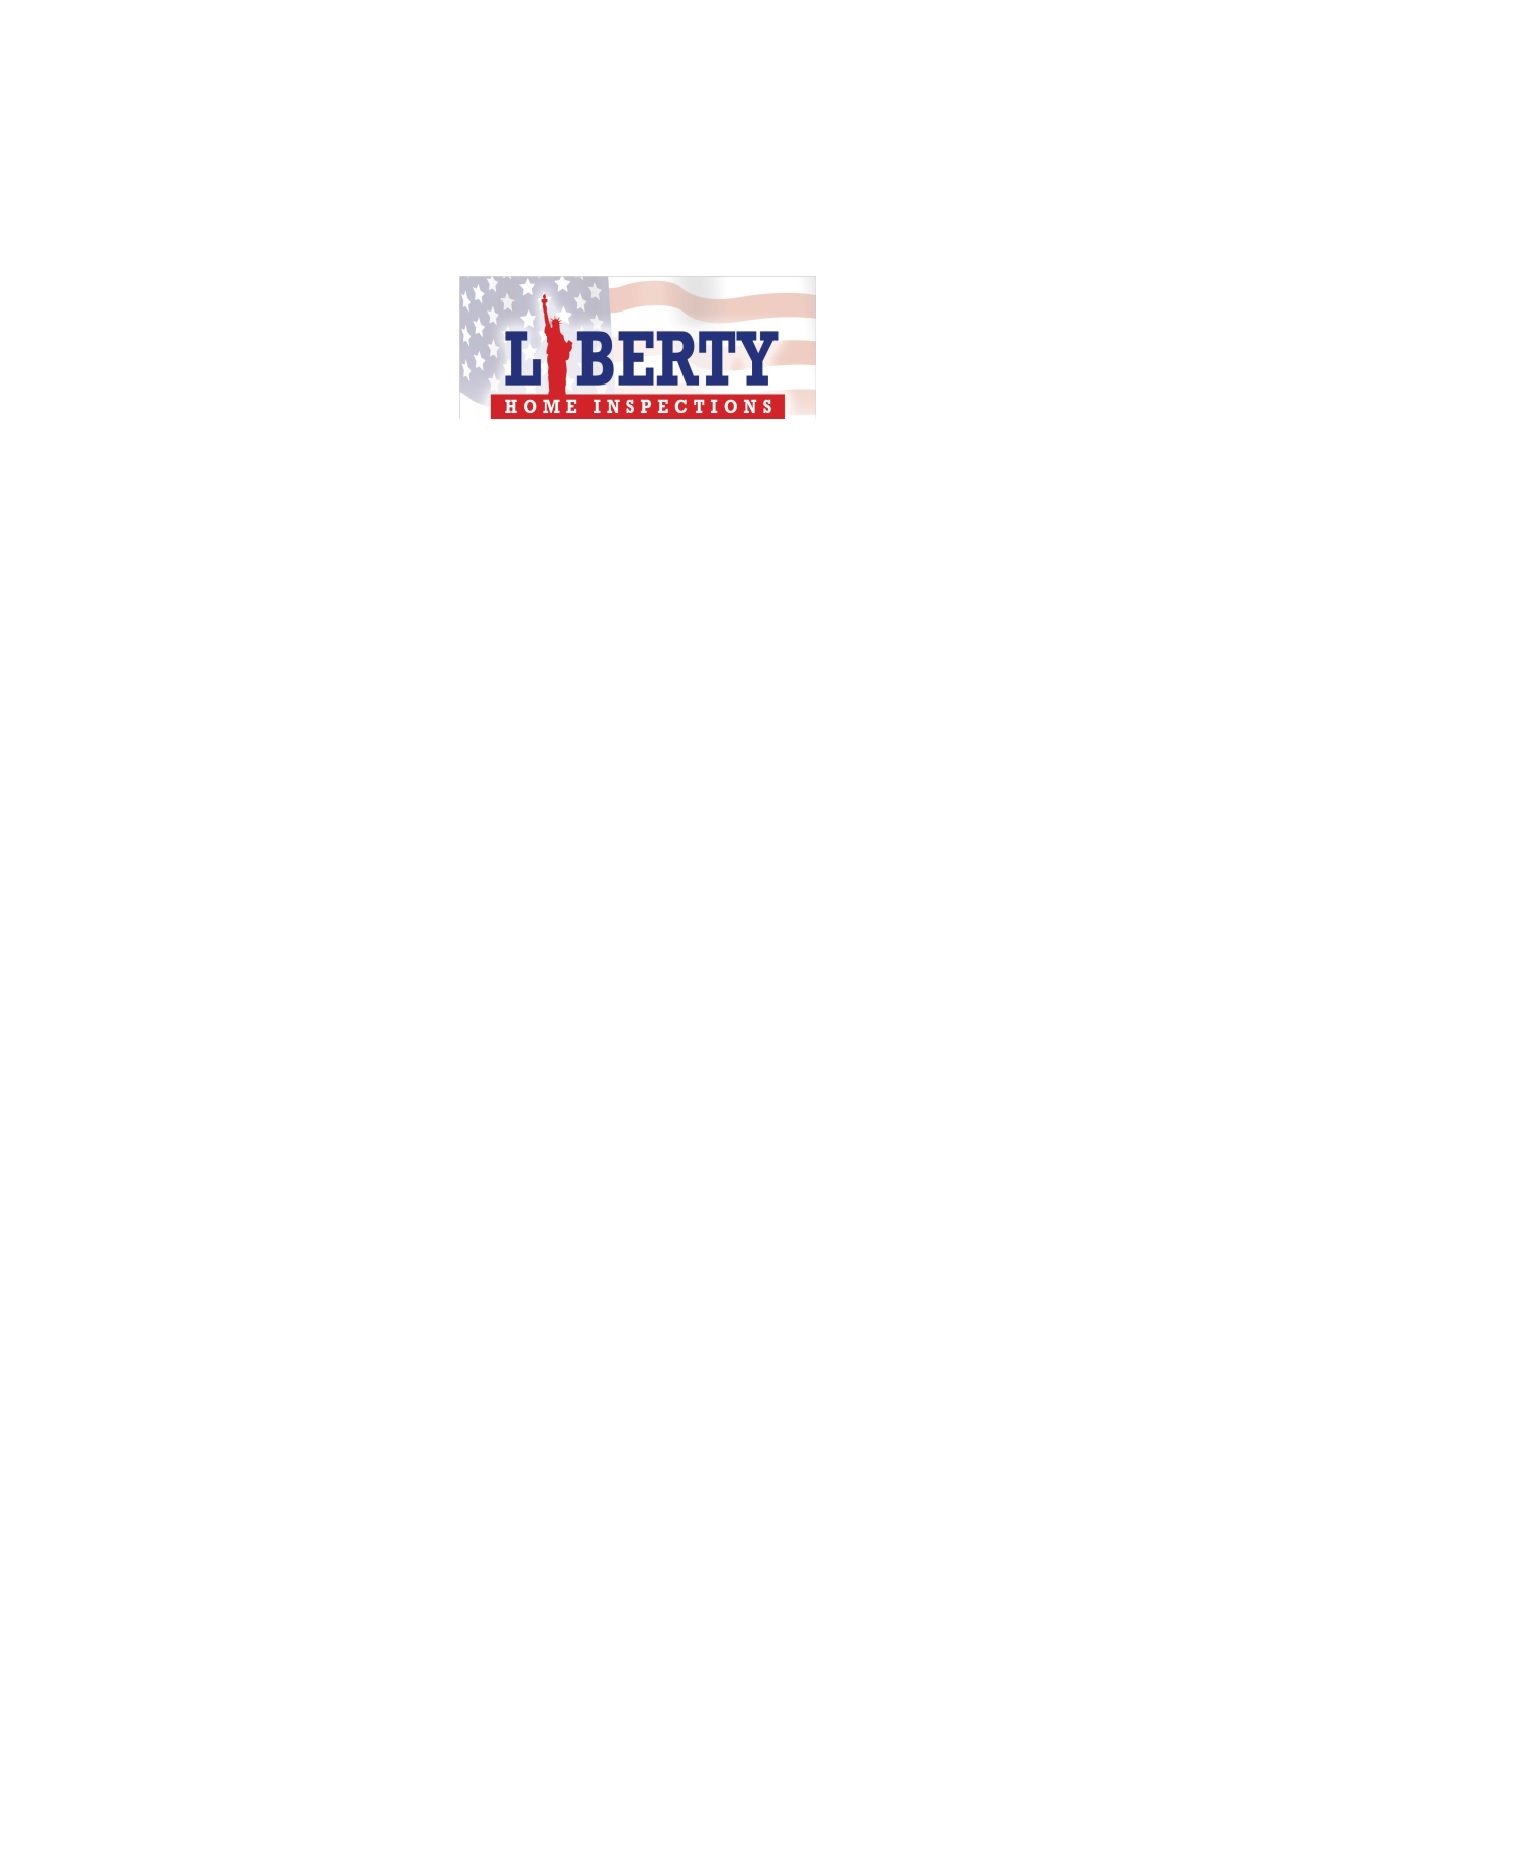 Liberty Home Inspections Logo